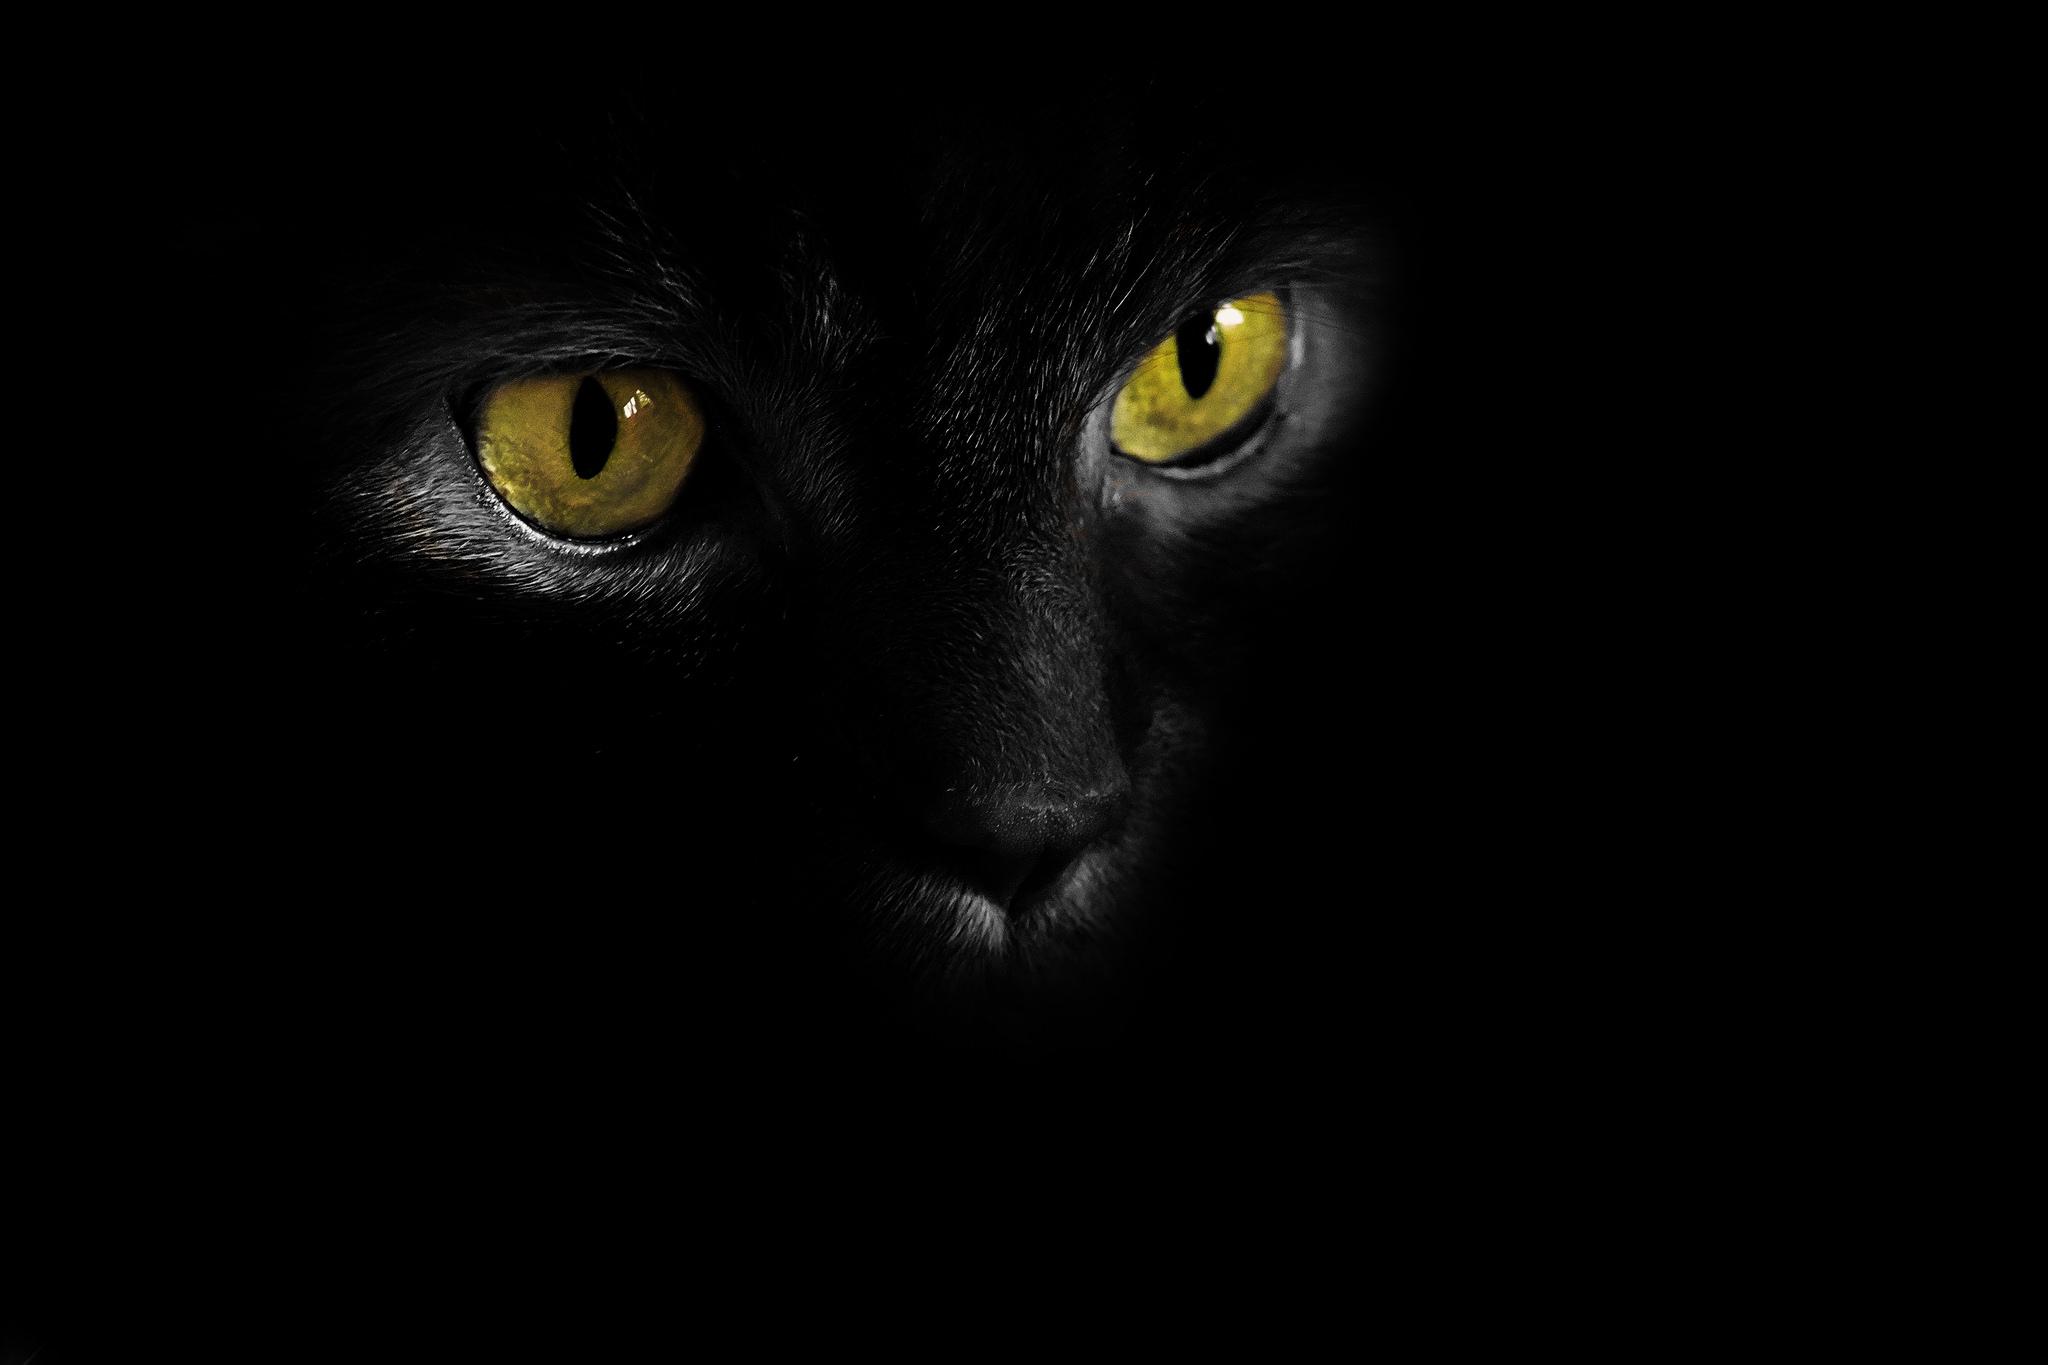 Wallpapers night face cat on the desktop